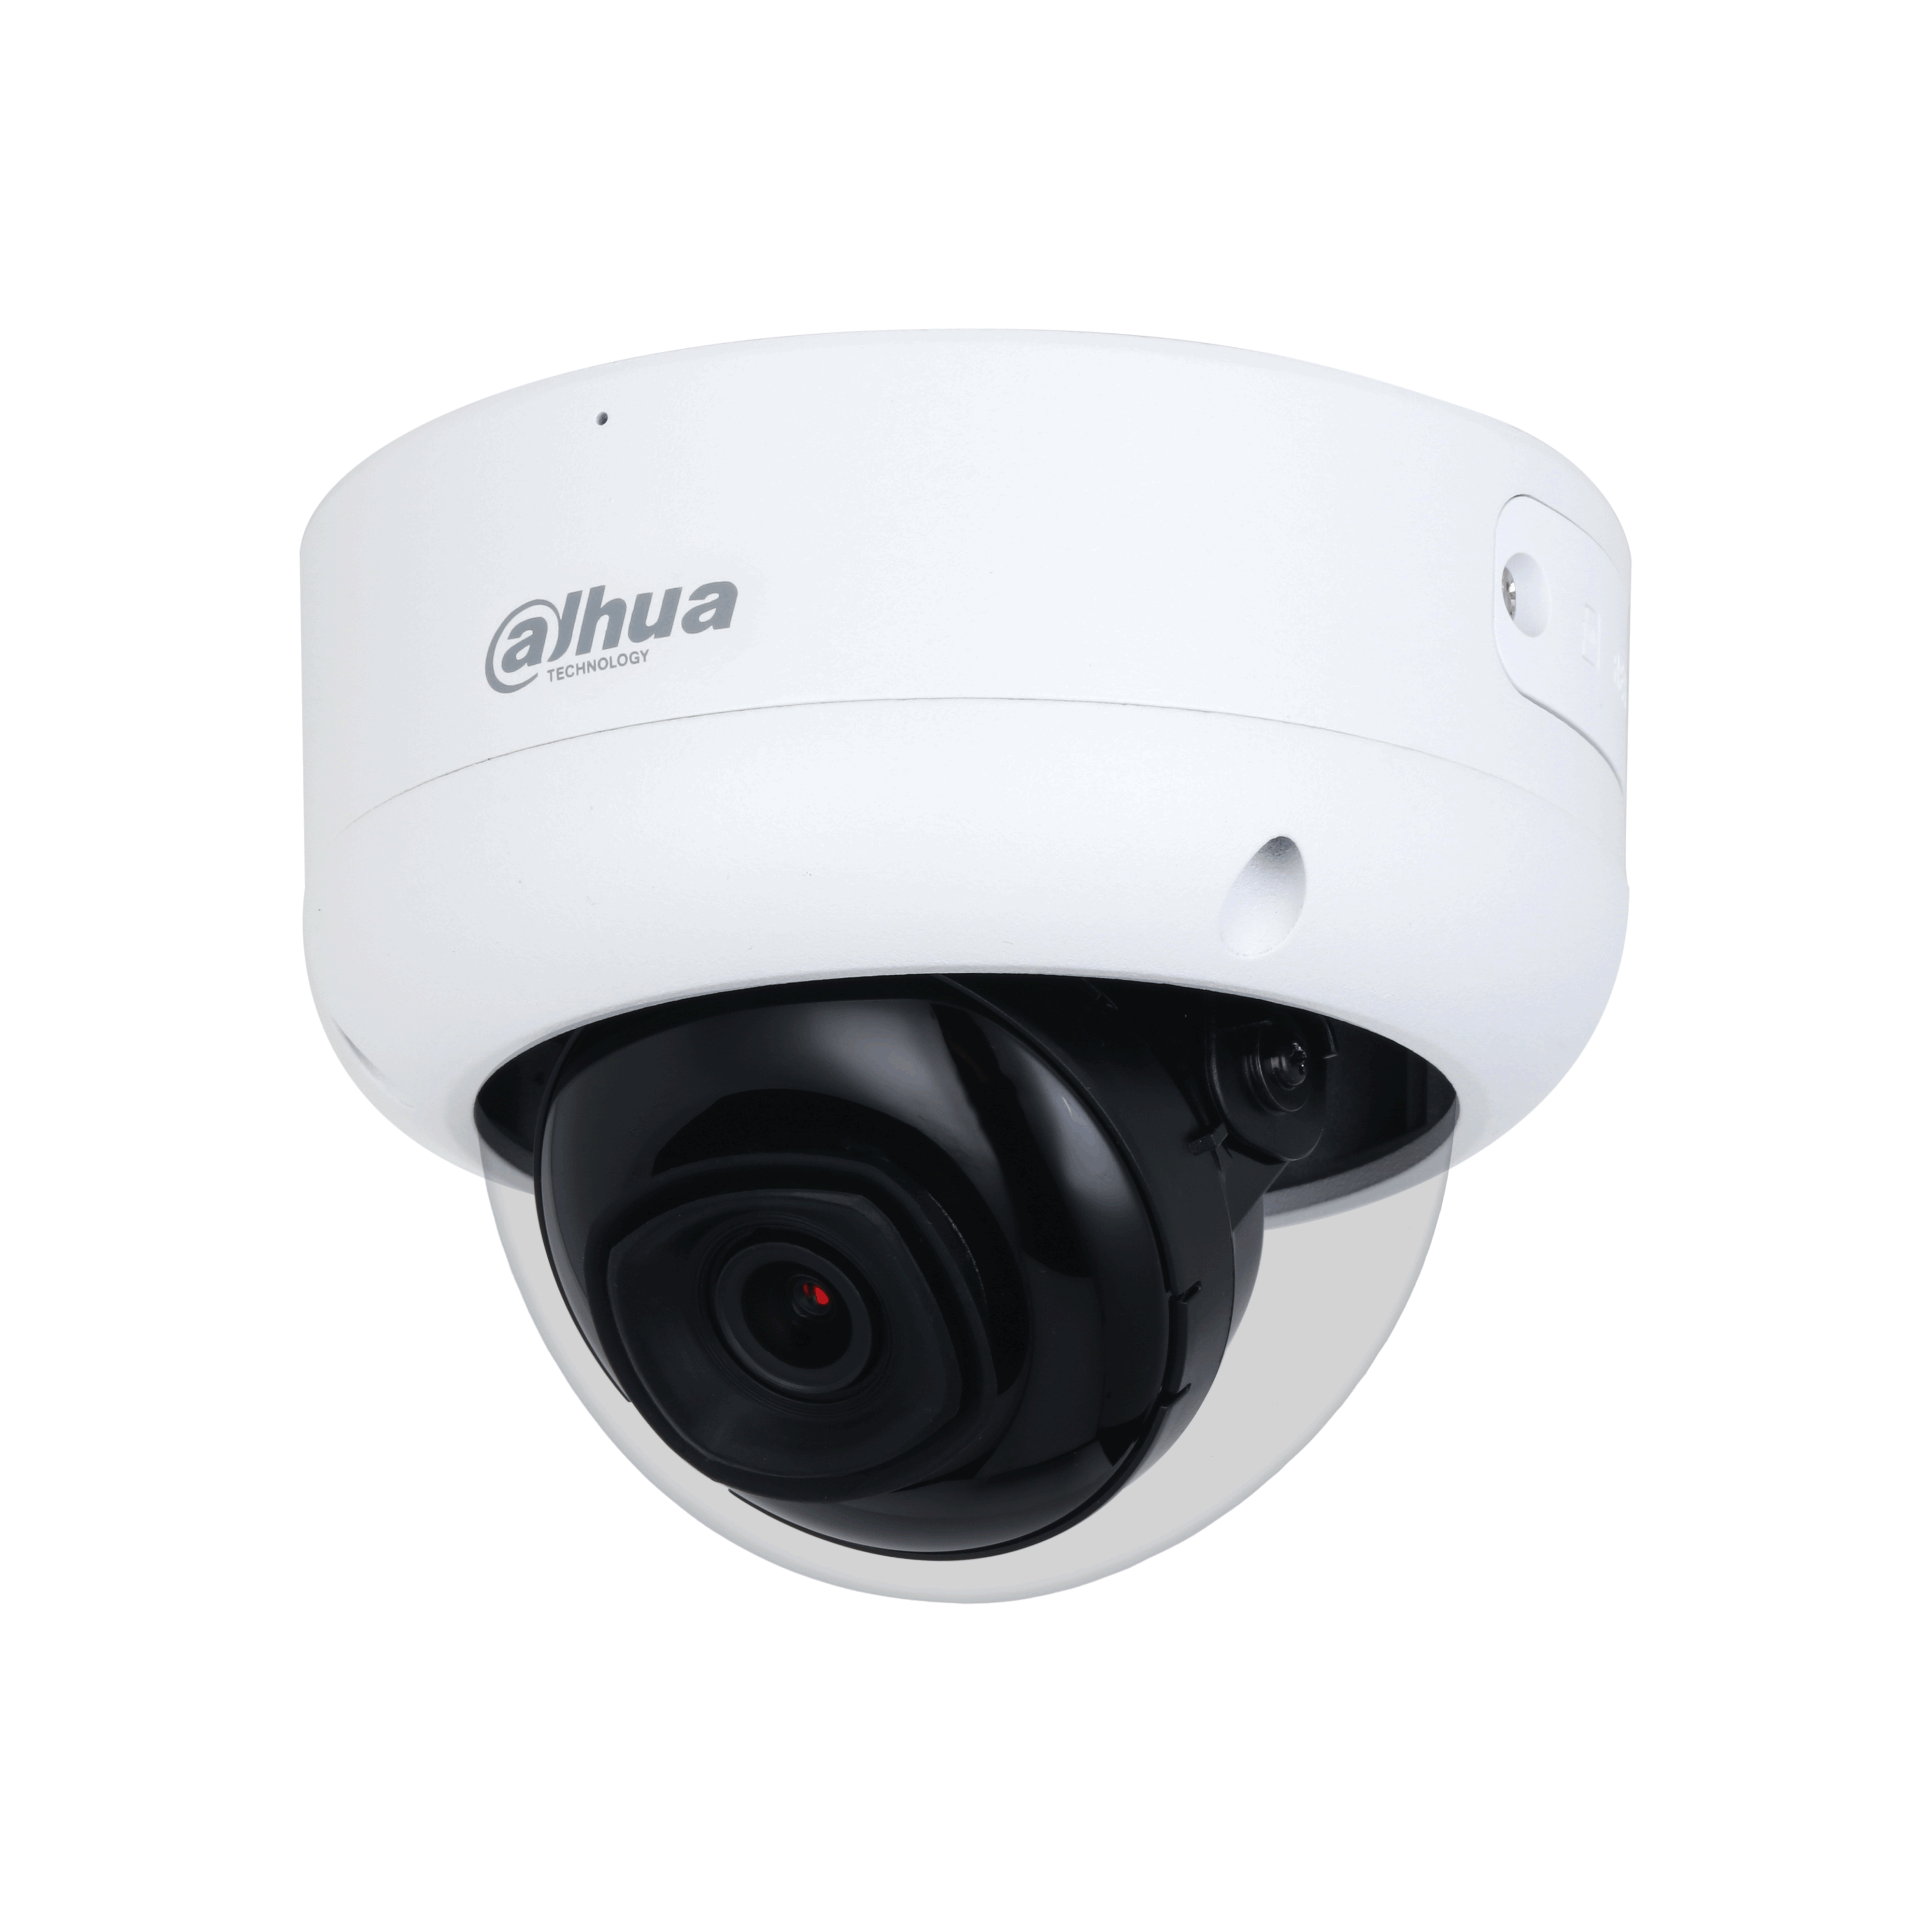 WIZSENSE SERIES IP CAMERA WHITE AI 8MP/4K H.264/4+/5/5+ DOME 120 WDR METAL 2.8MM FIXED LENS STARLIGHT IR 30M POE IP67 BUILT IN MIC AUDIO IN AUDIO OUT 1 x ALARM IN 1 x ALARM OUT SUPPORT UP TO 256GB SD IK10 12VDC